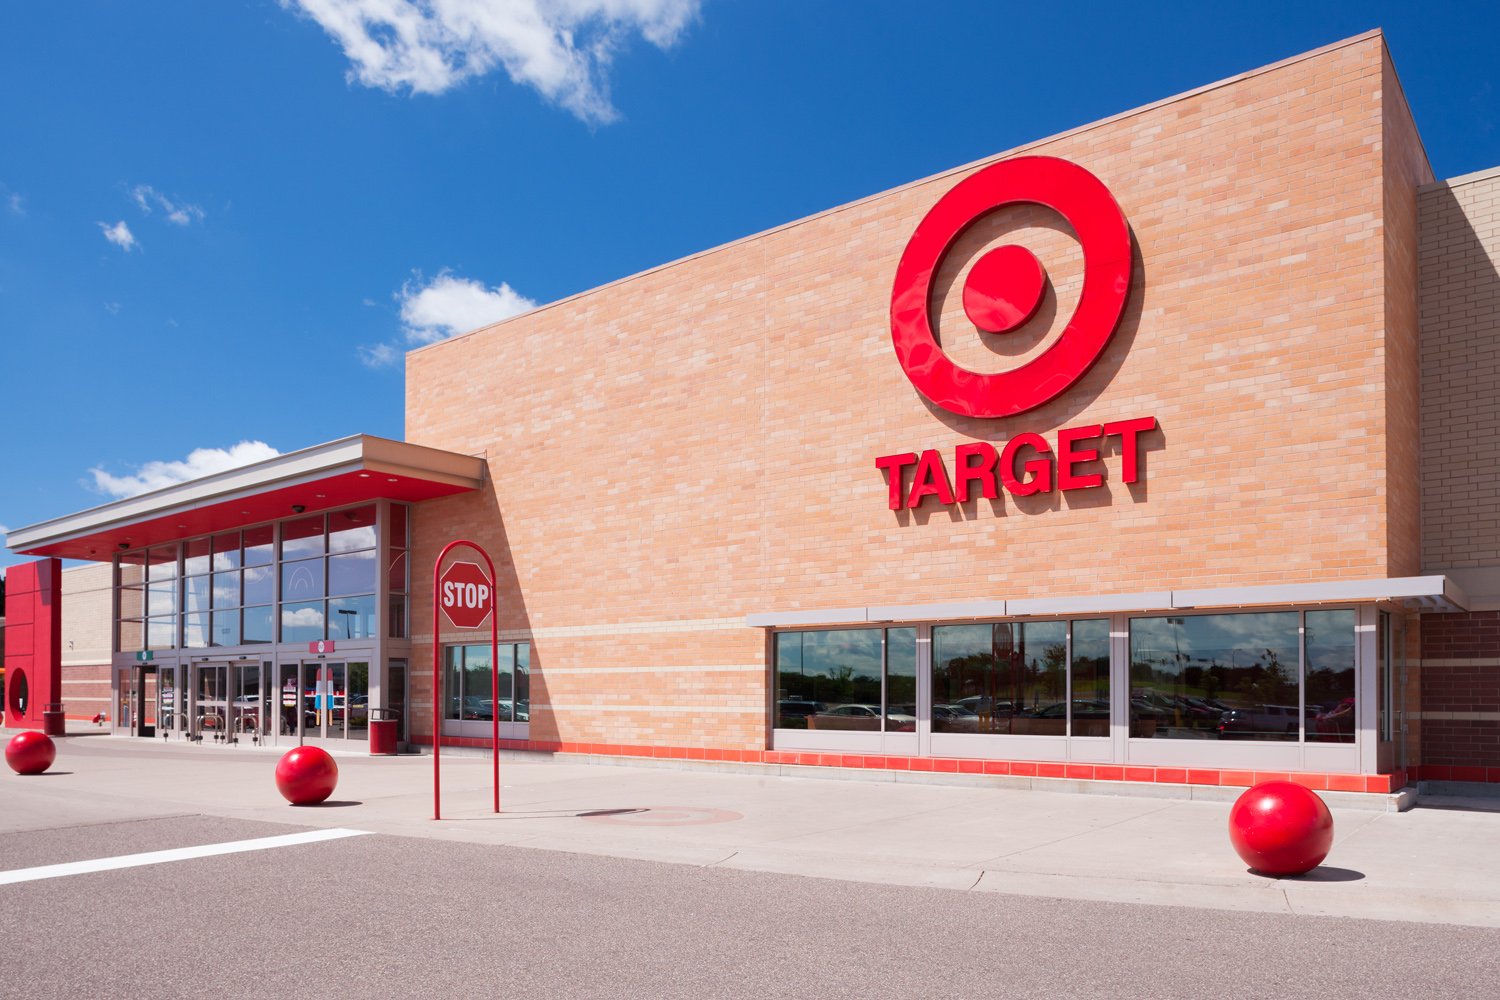 Why Target is closed this year - stores close on Thanksgiving for good